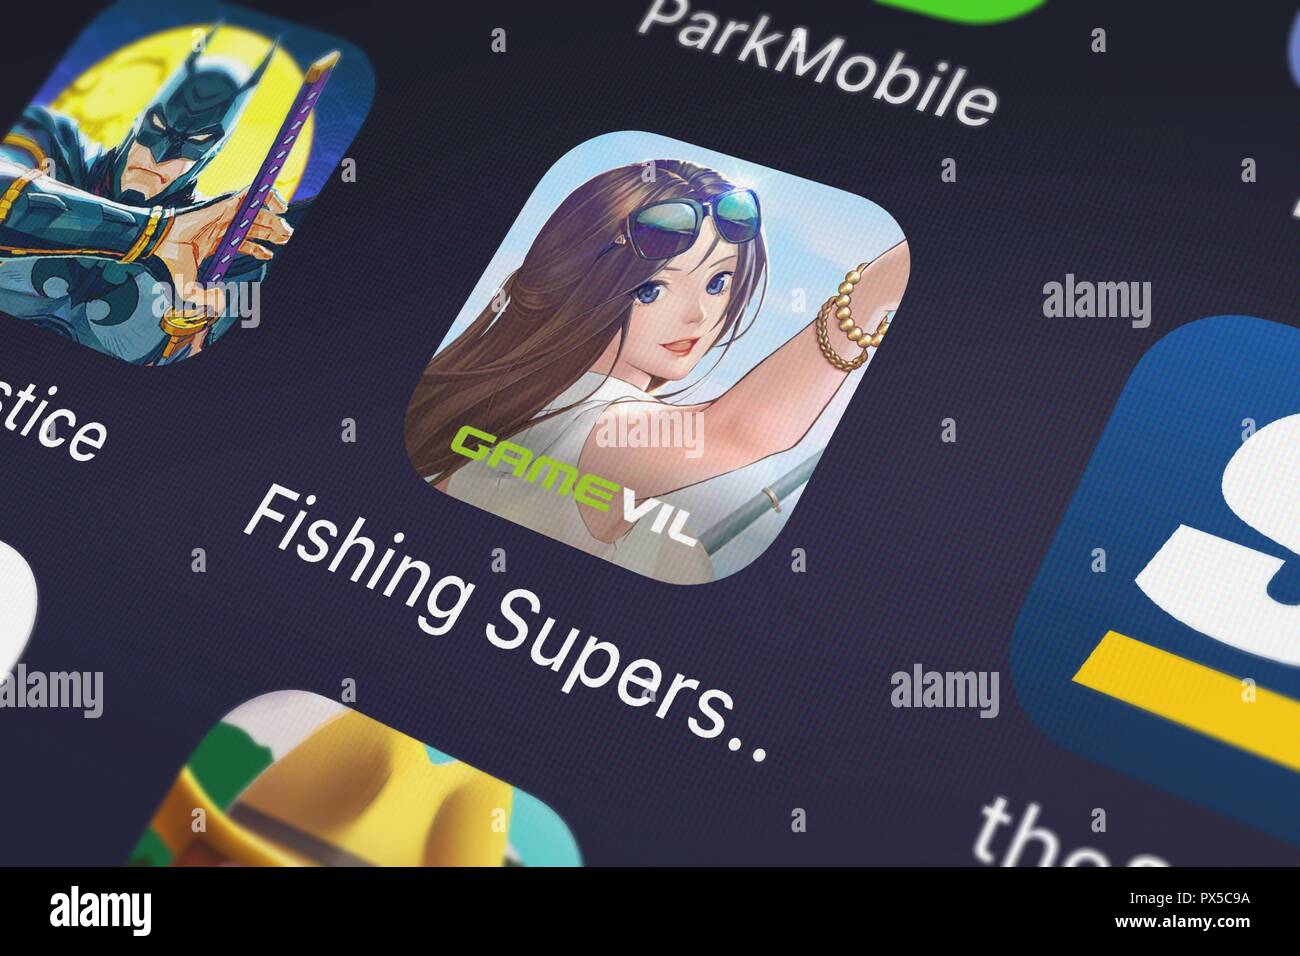 London, United Kingdom - October 19, 2018: Close-up of the Fishing Superstars : Season 5 icon from GAMEVIL Inc. on an iPhone. Stock Photo